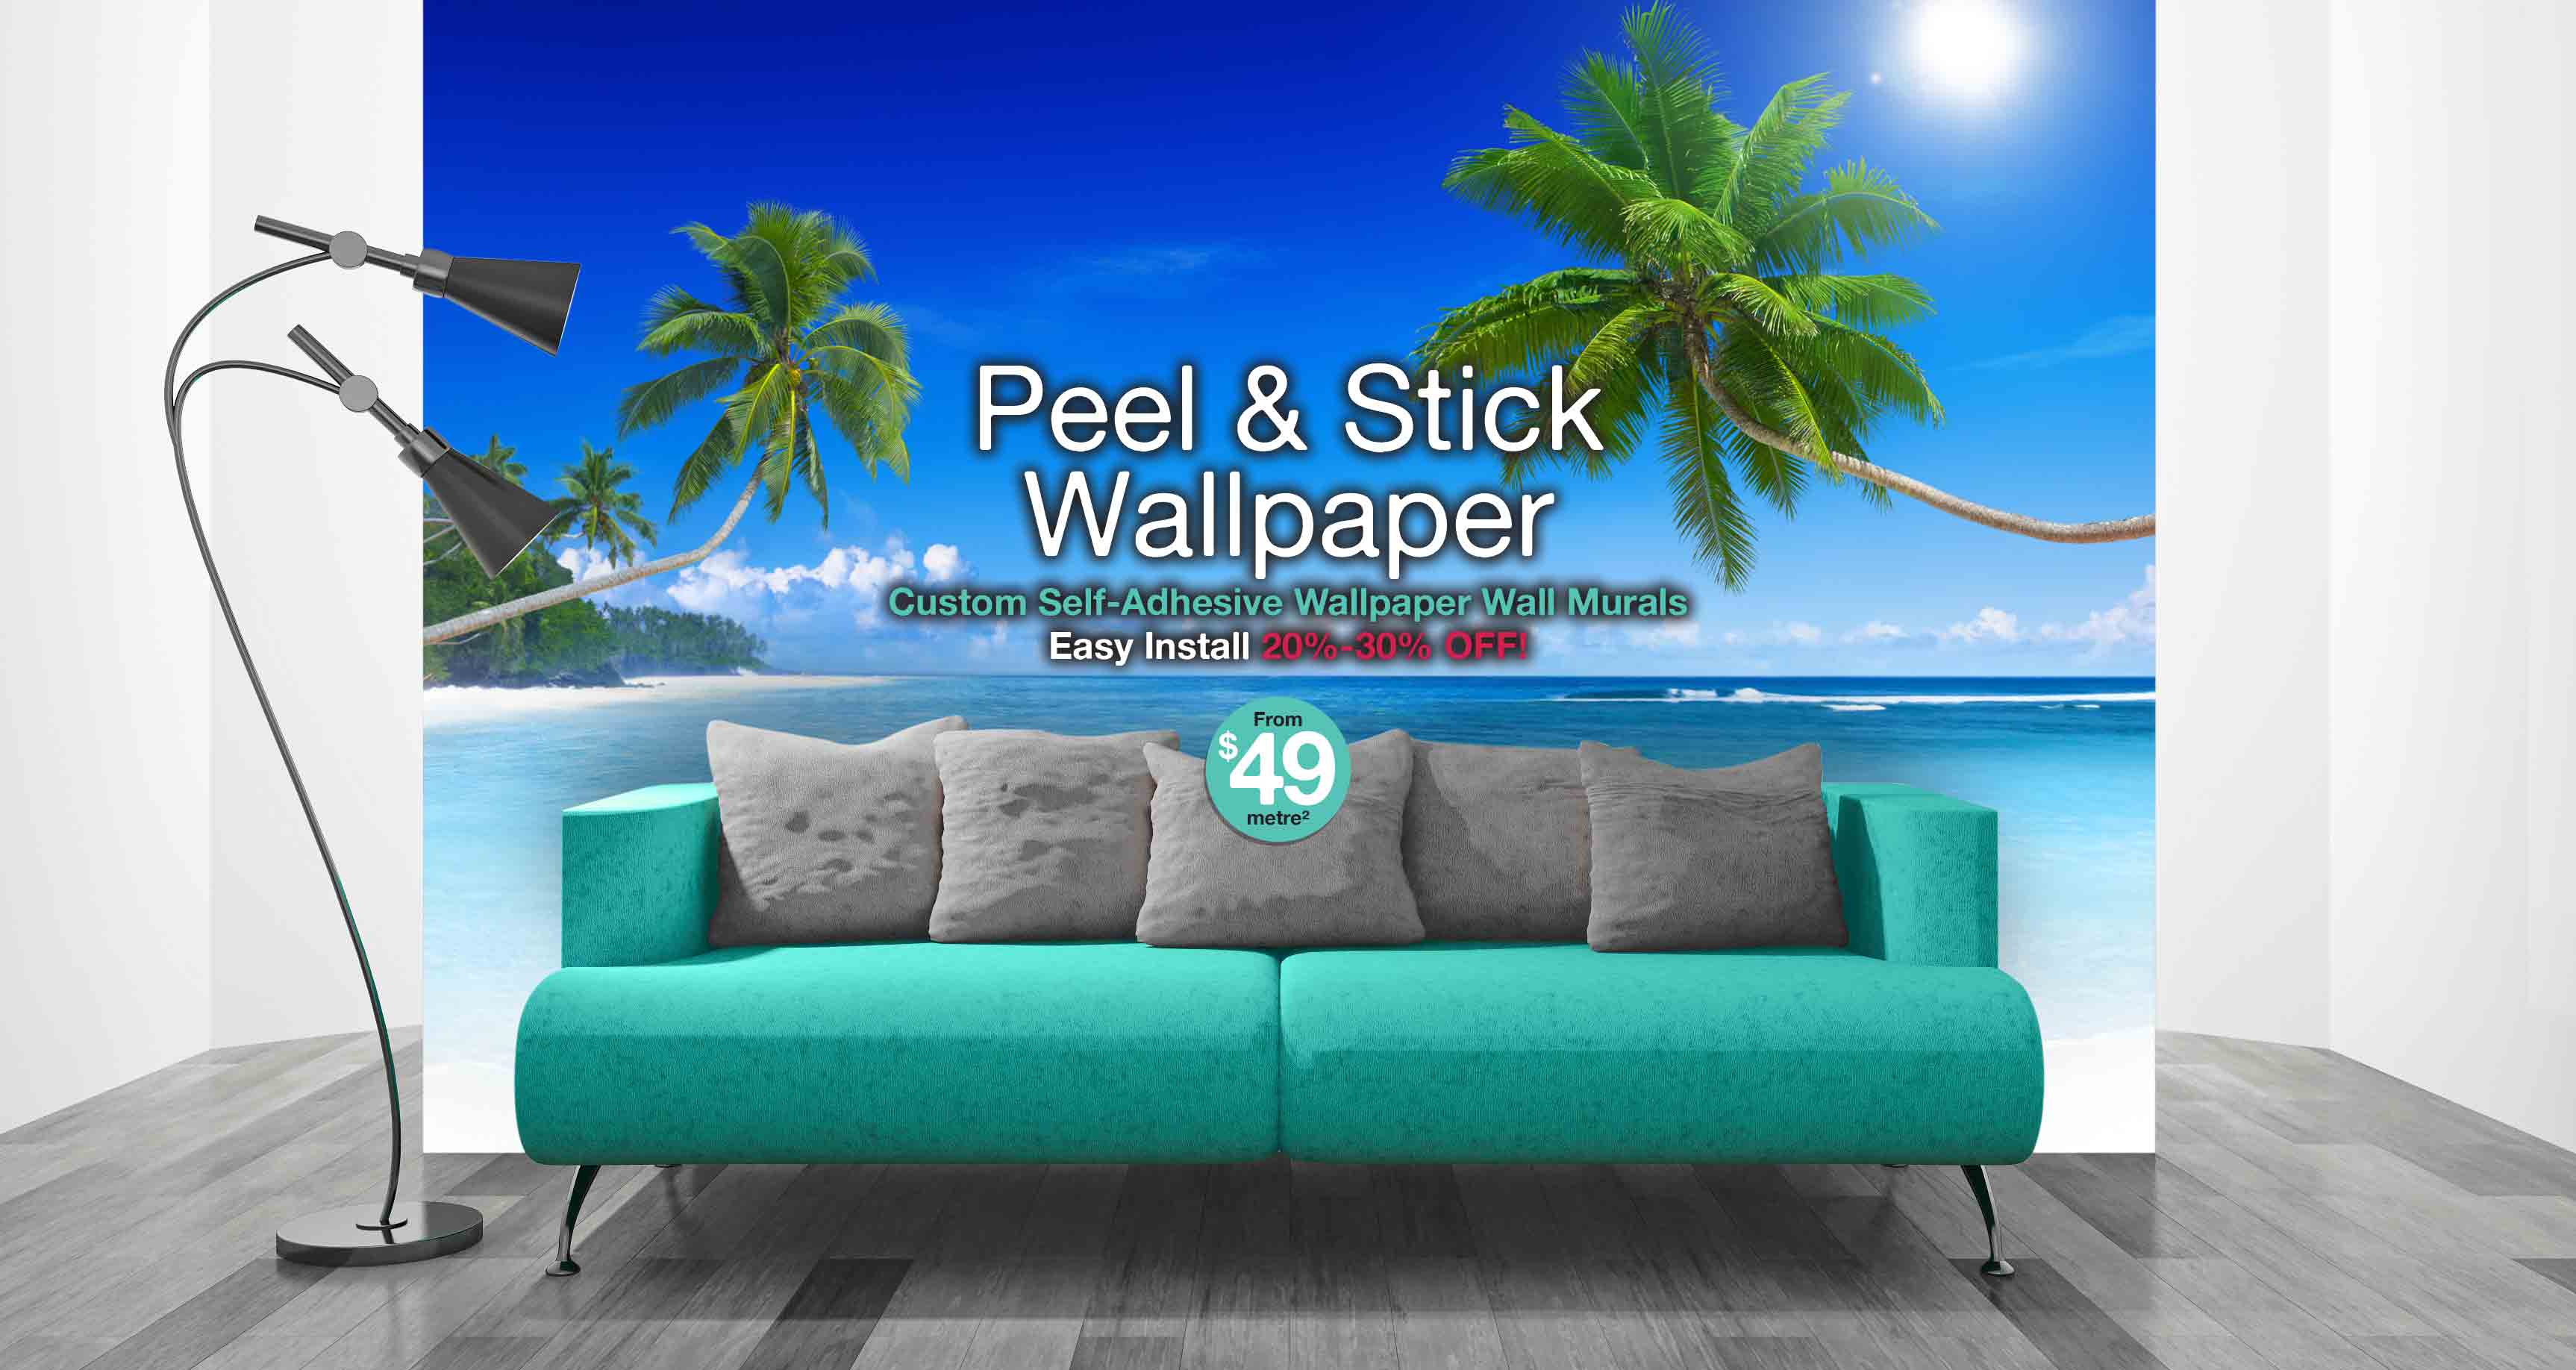 removable wallpaper australia,nature,wall,mural,natural landscape,couch